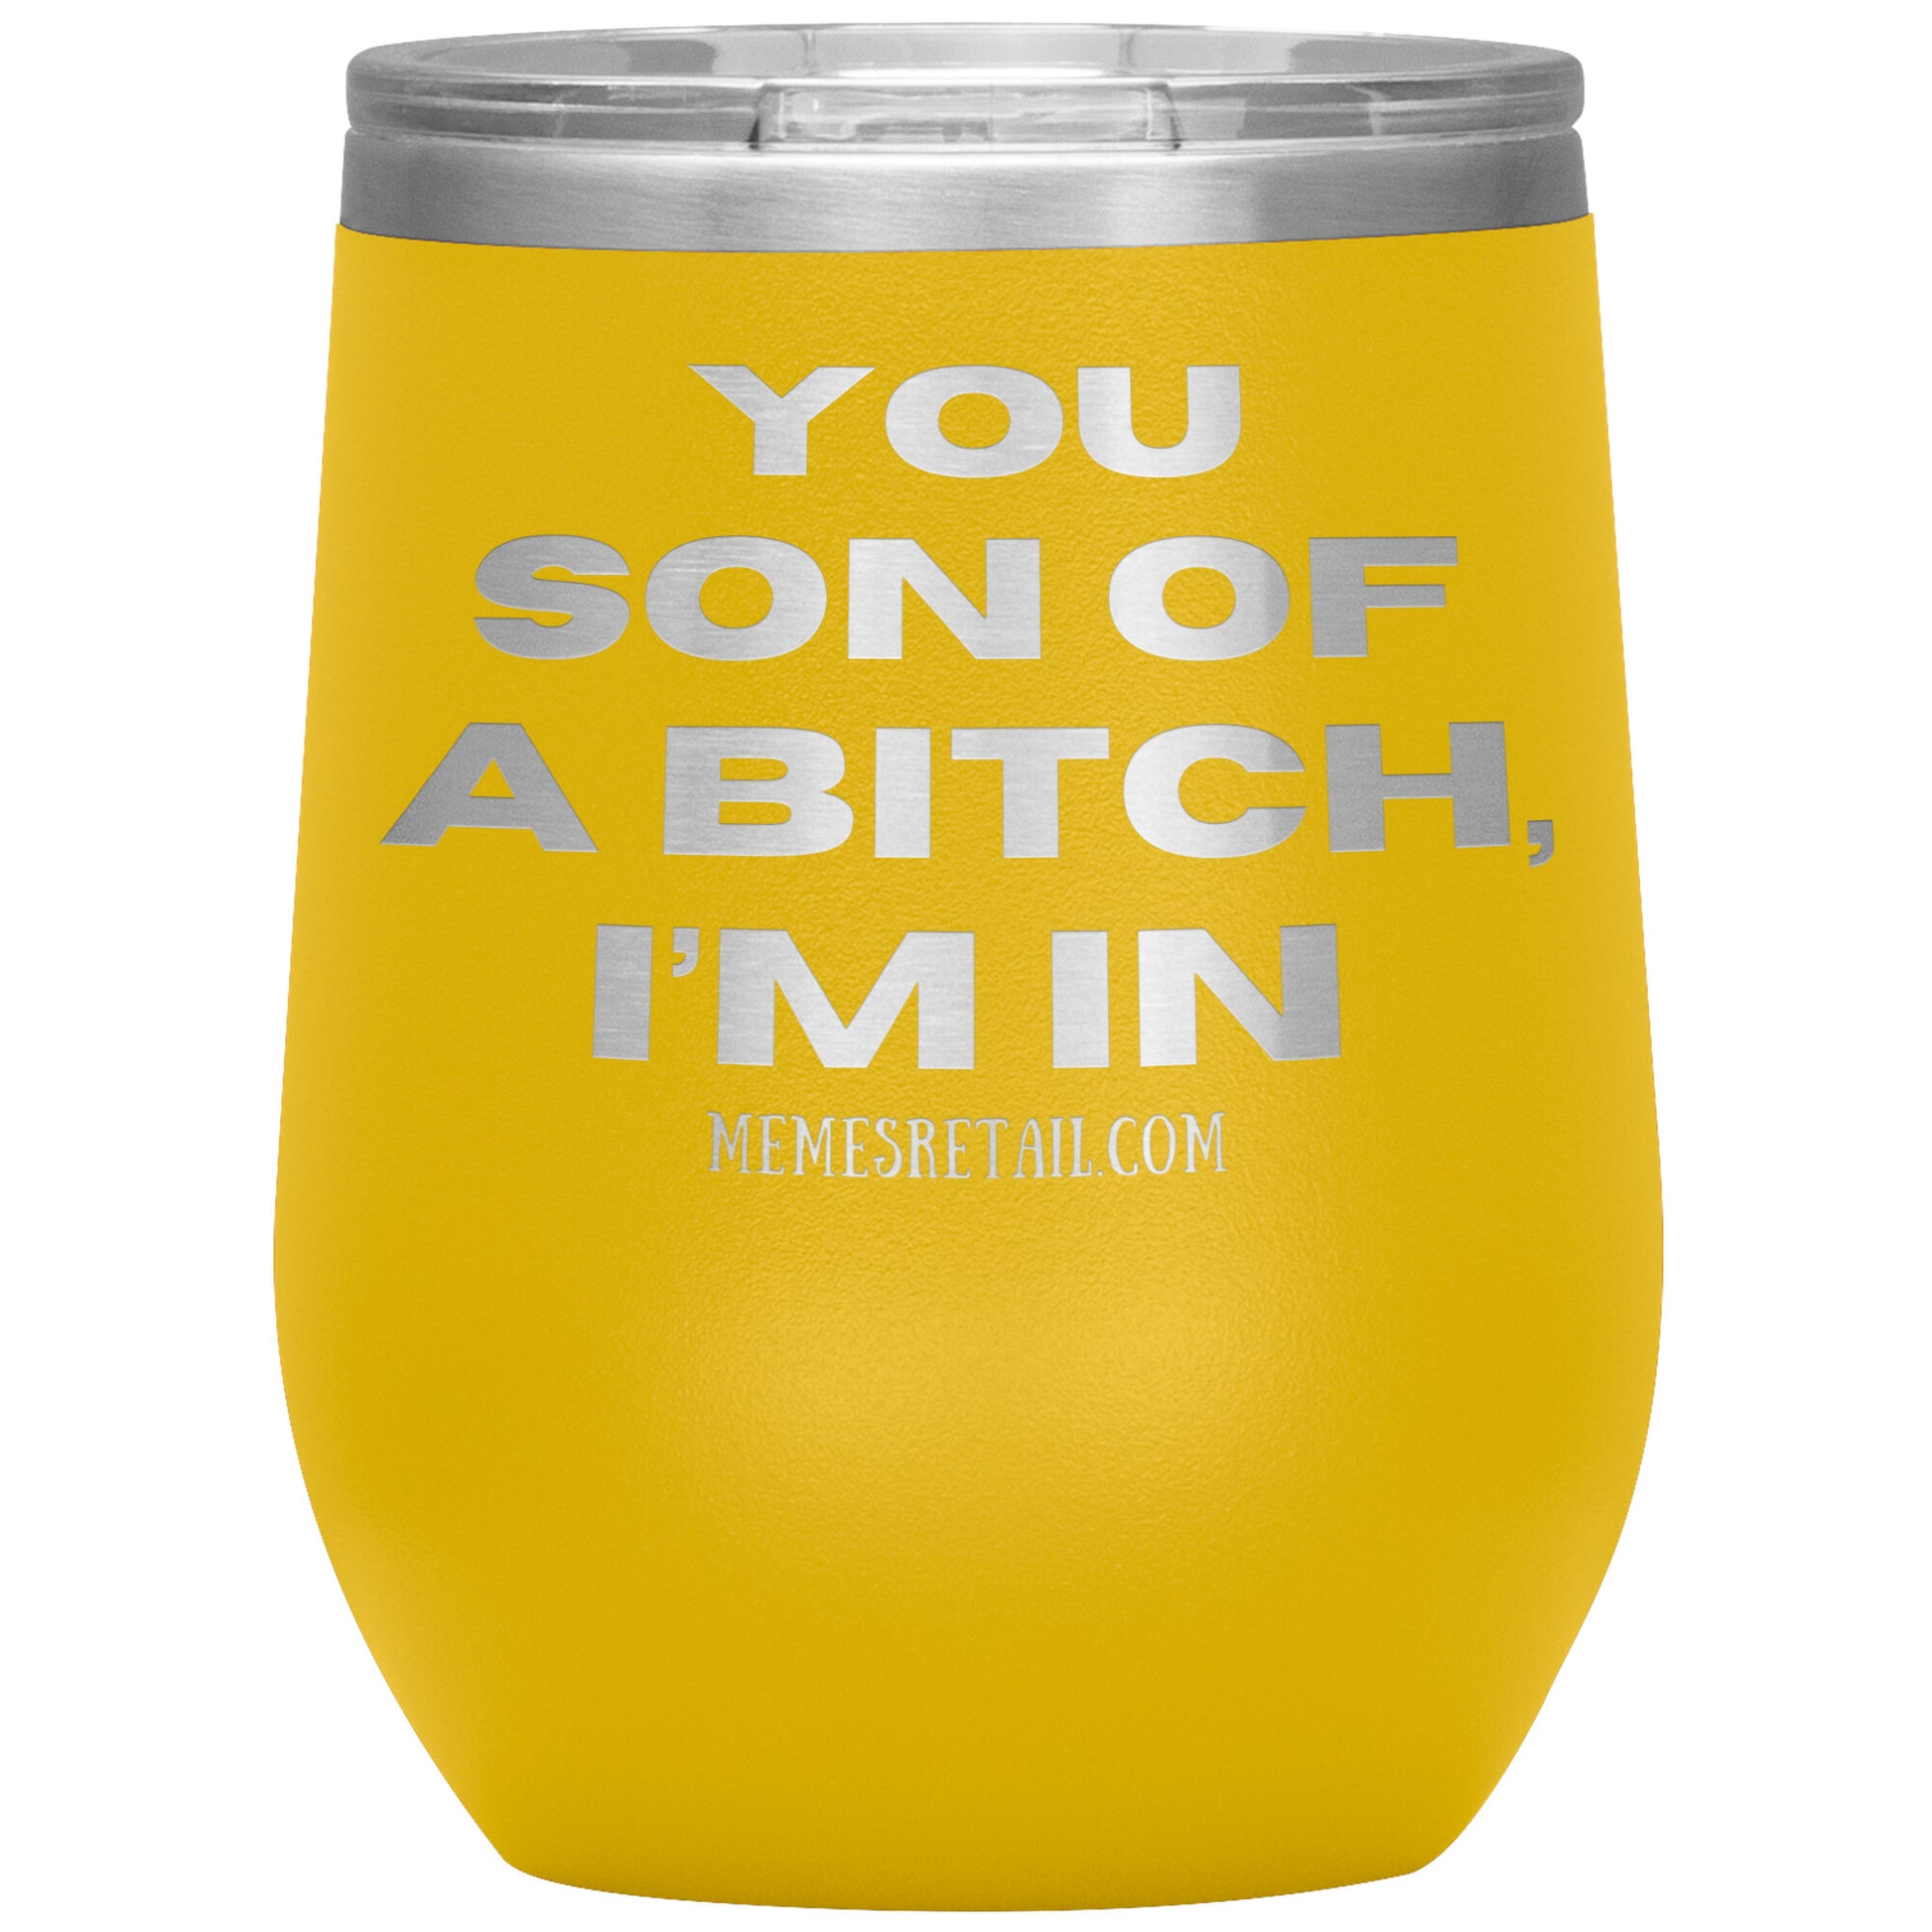 You son of a bitch, I’m in Tumblers, 12oz Wine Insulated Tumbler / Yellow - MemesRetail.com